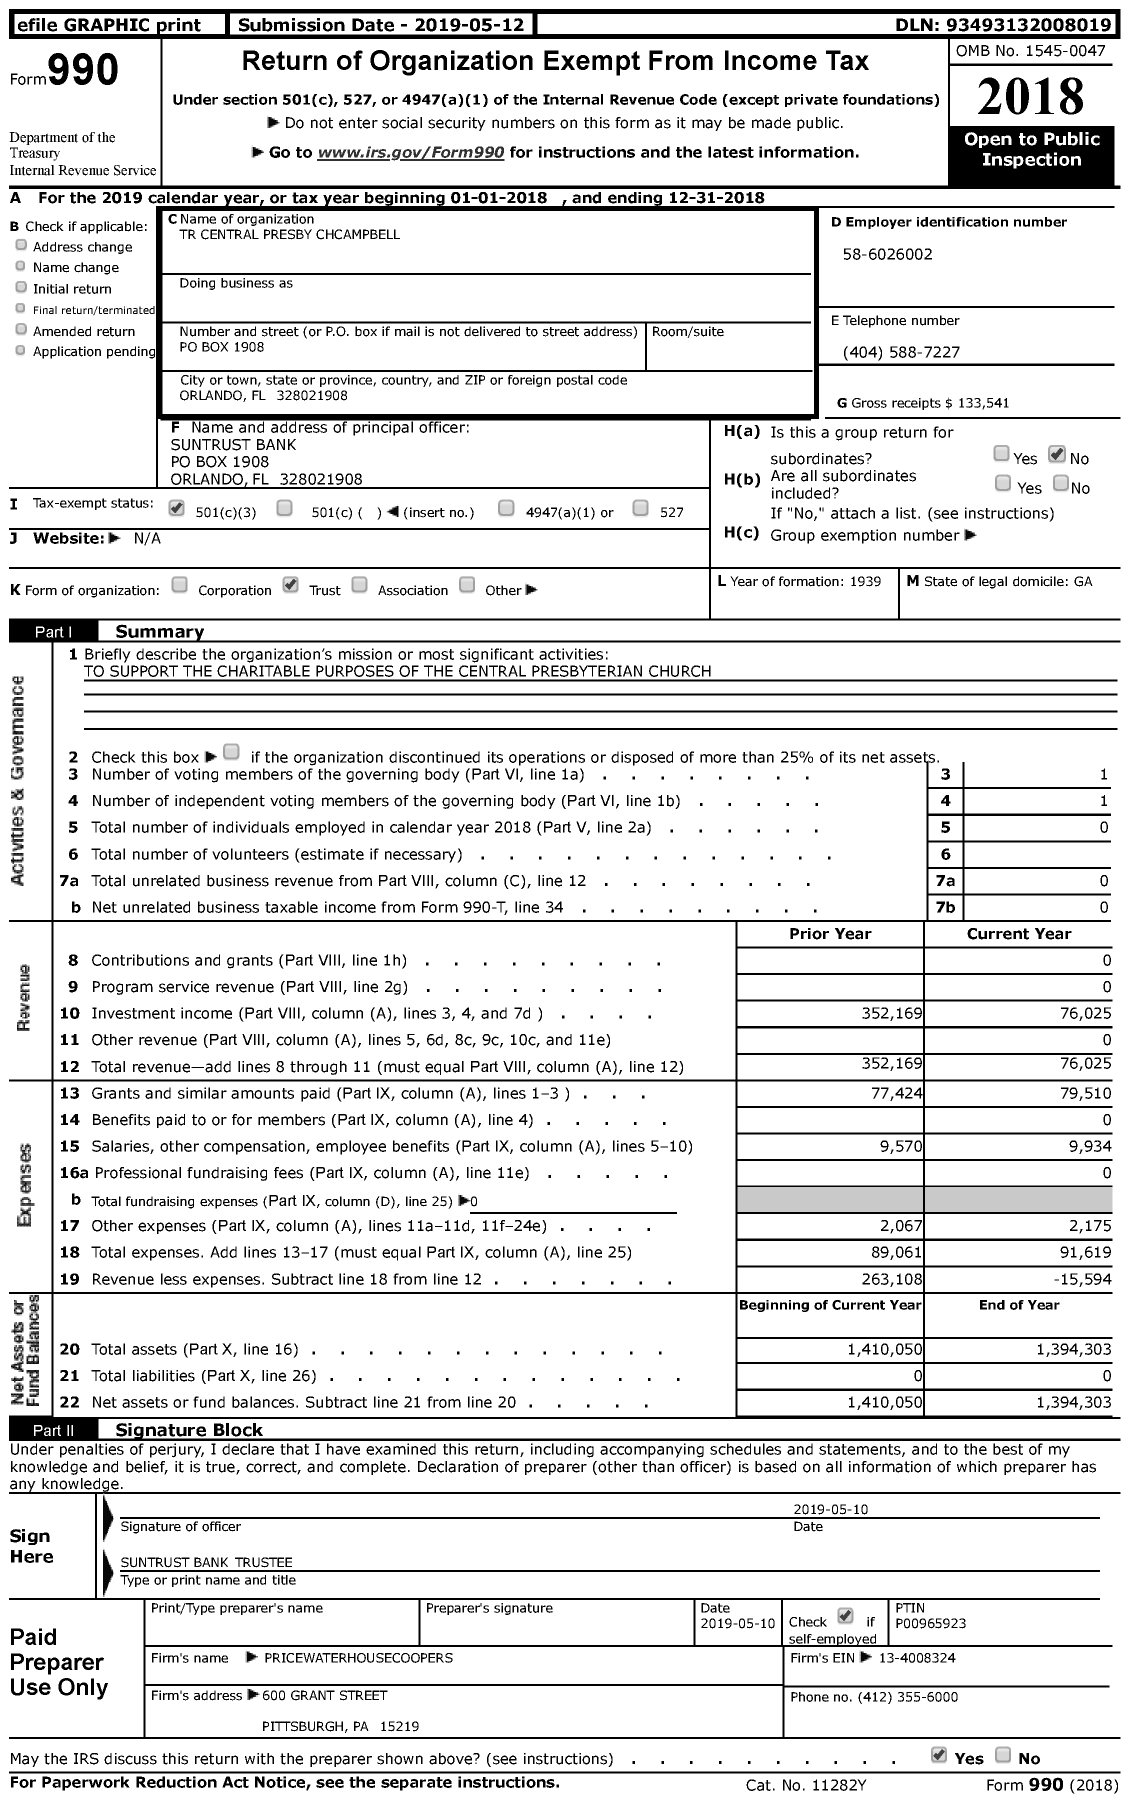 Image of first page of 2018 Form 990 for Central Presbyterian Chcampbell Trust